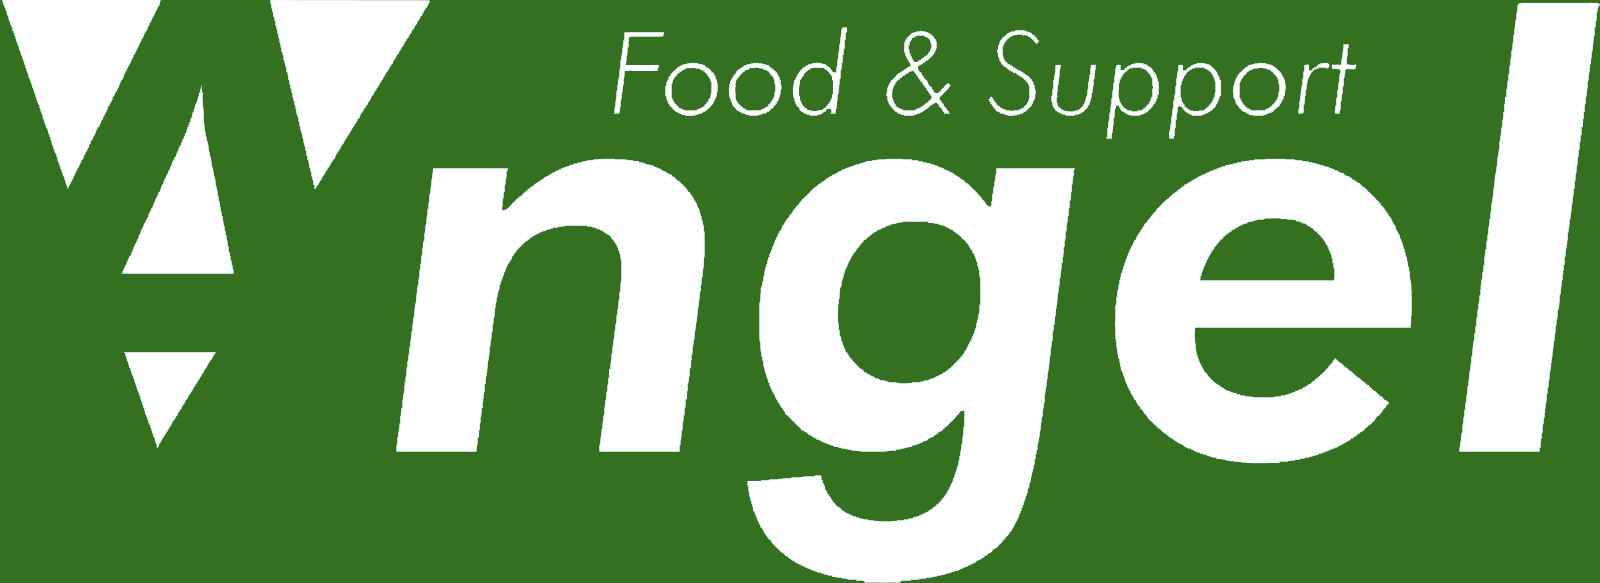 Angel Food and Support Services